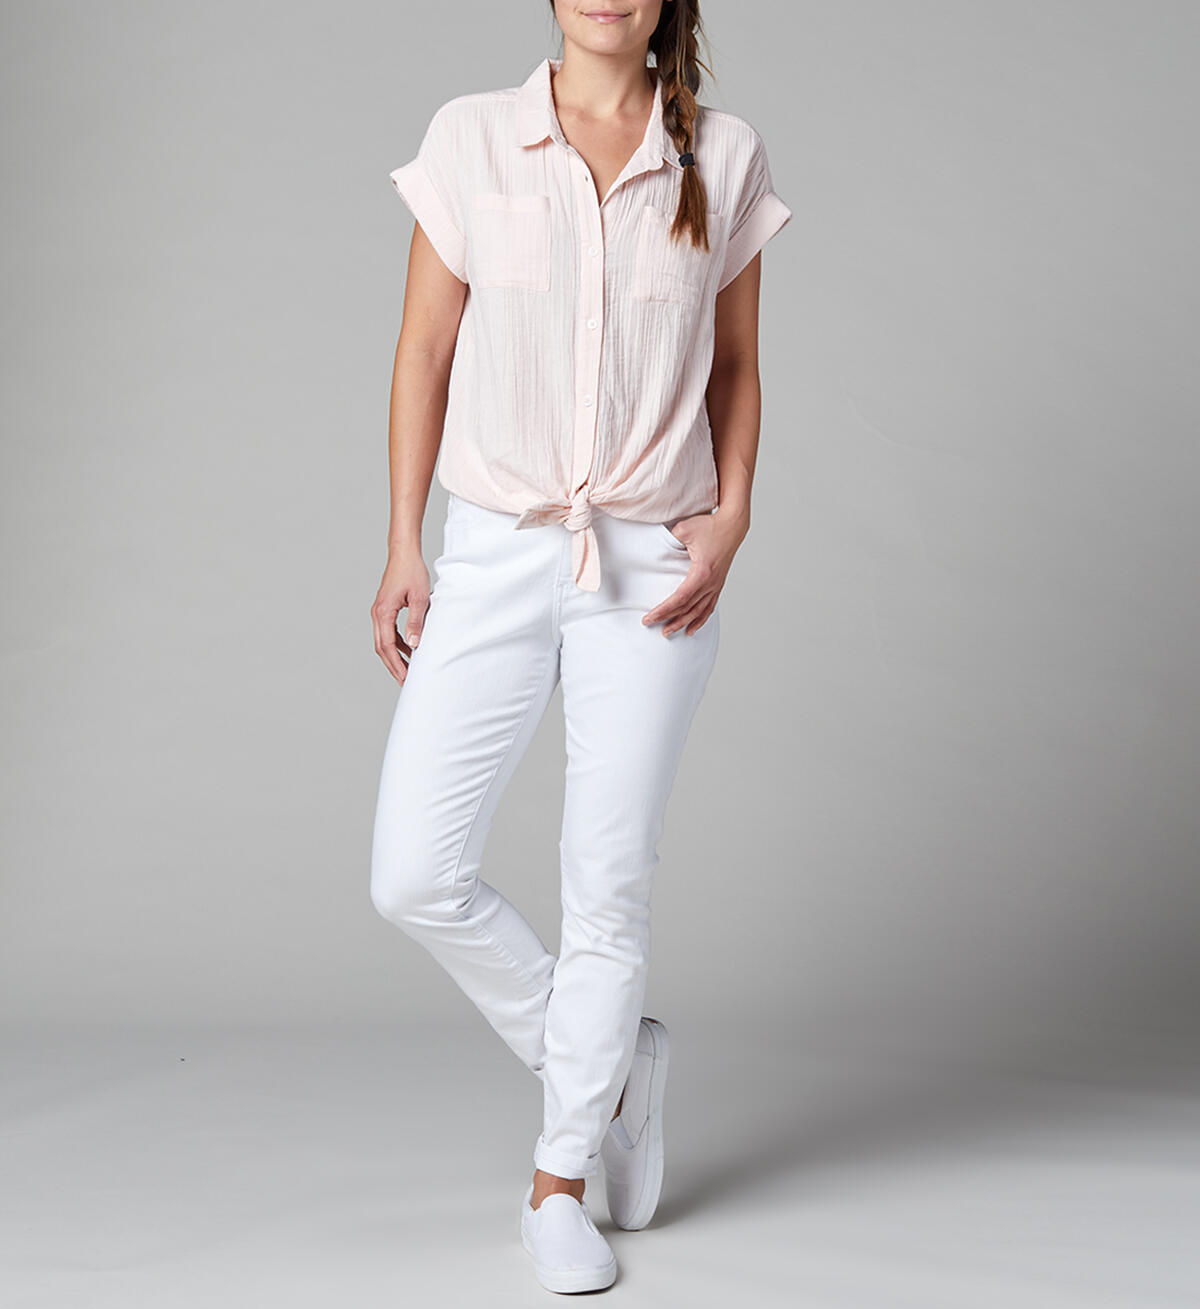 Sally Button-Down Tie-Front Shirt, , hi-res image number 0